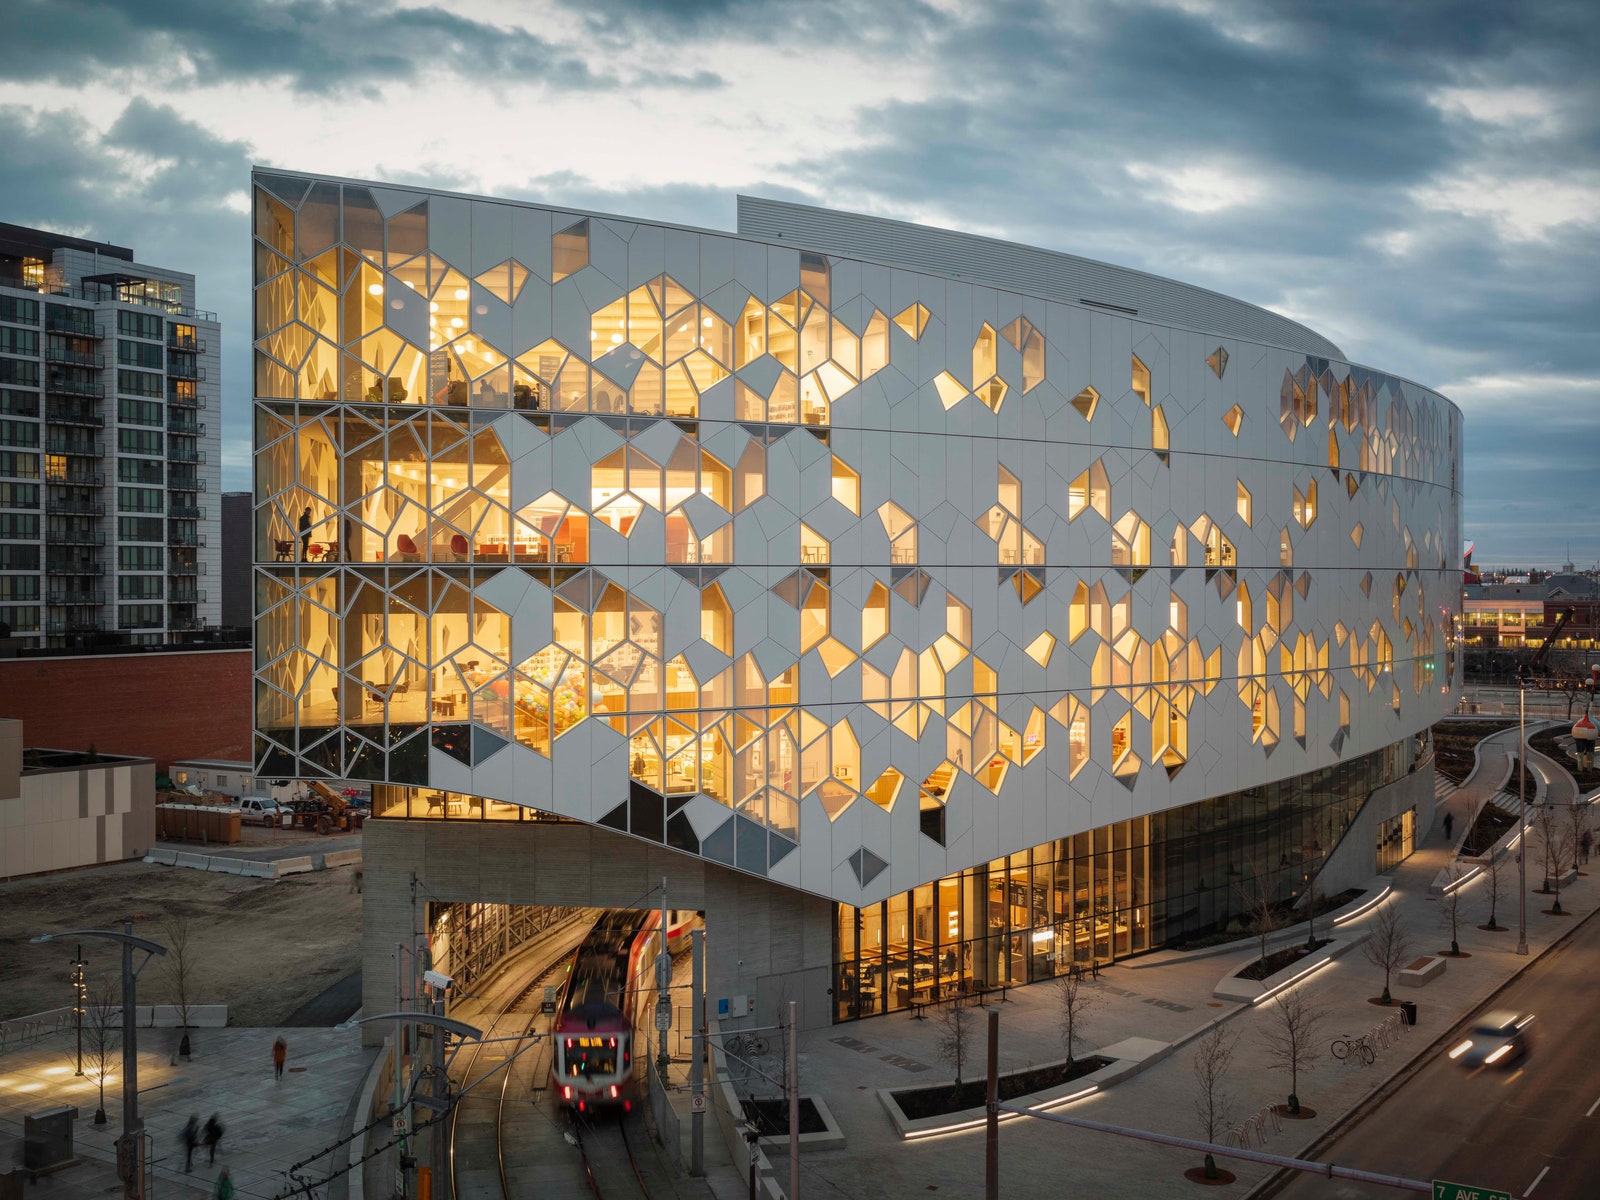 Step Inside the World’s 15 Most Futuristic Libraries